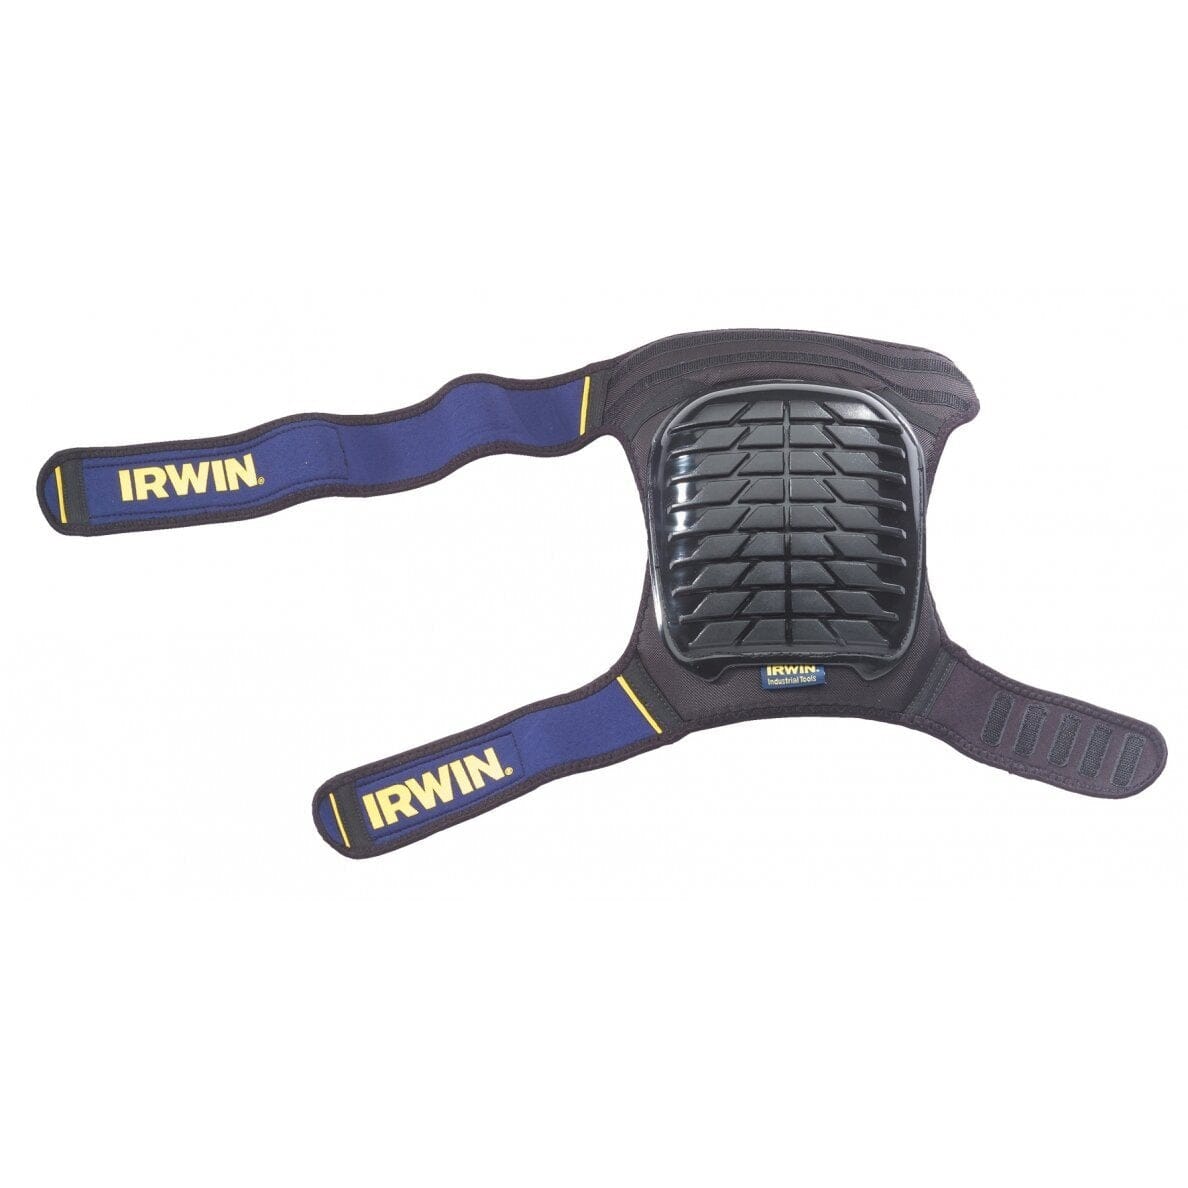 Irwin All-Terrain Safety Kneepads | Supply Master Accra, Ghana Eye Protection & Safety Glasses Buy Tools hardware Building materials